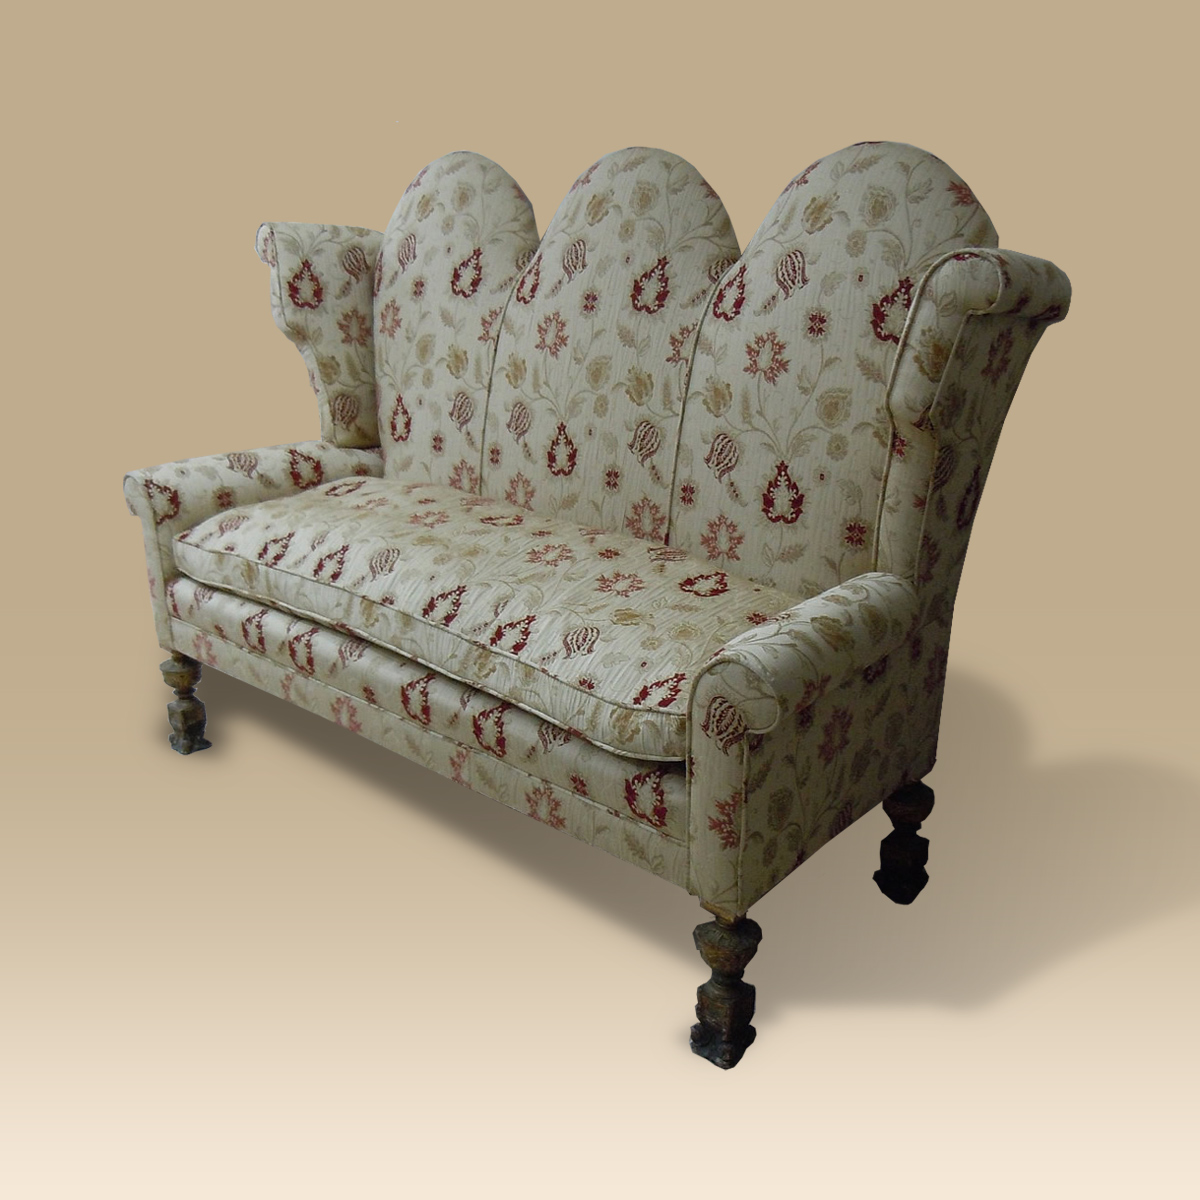 An 18th Century Wing Back S...